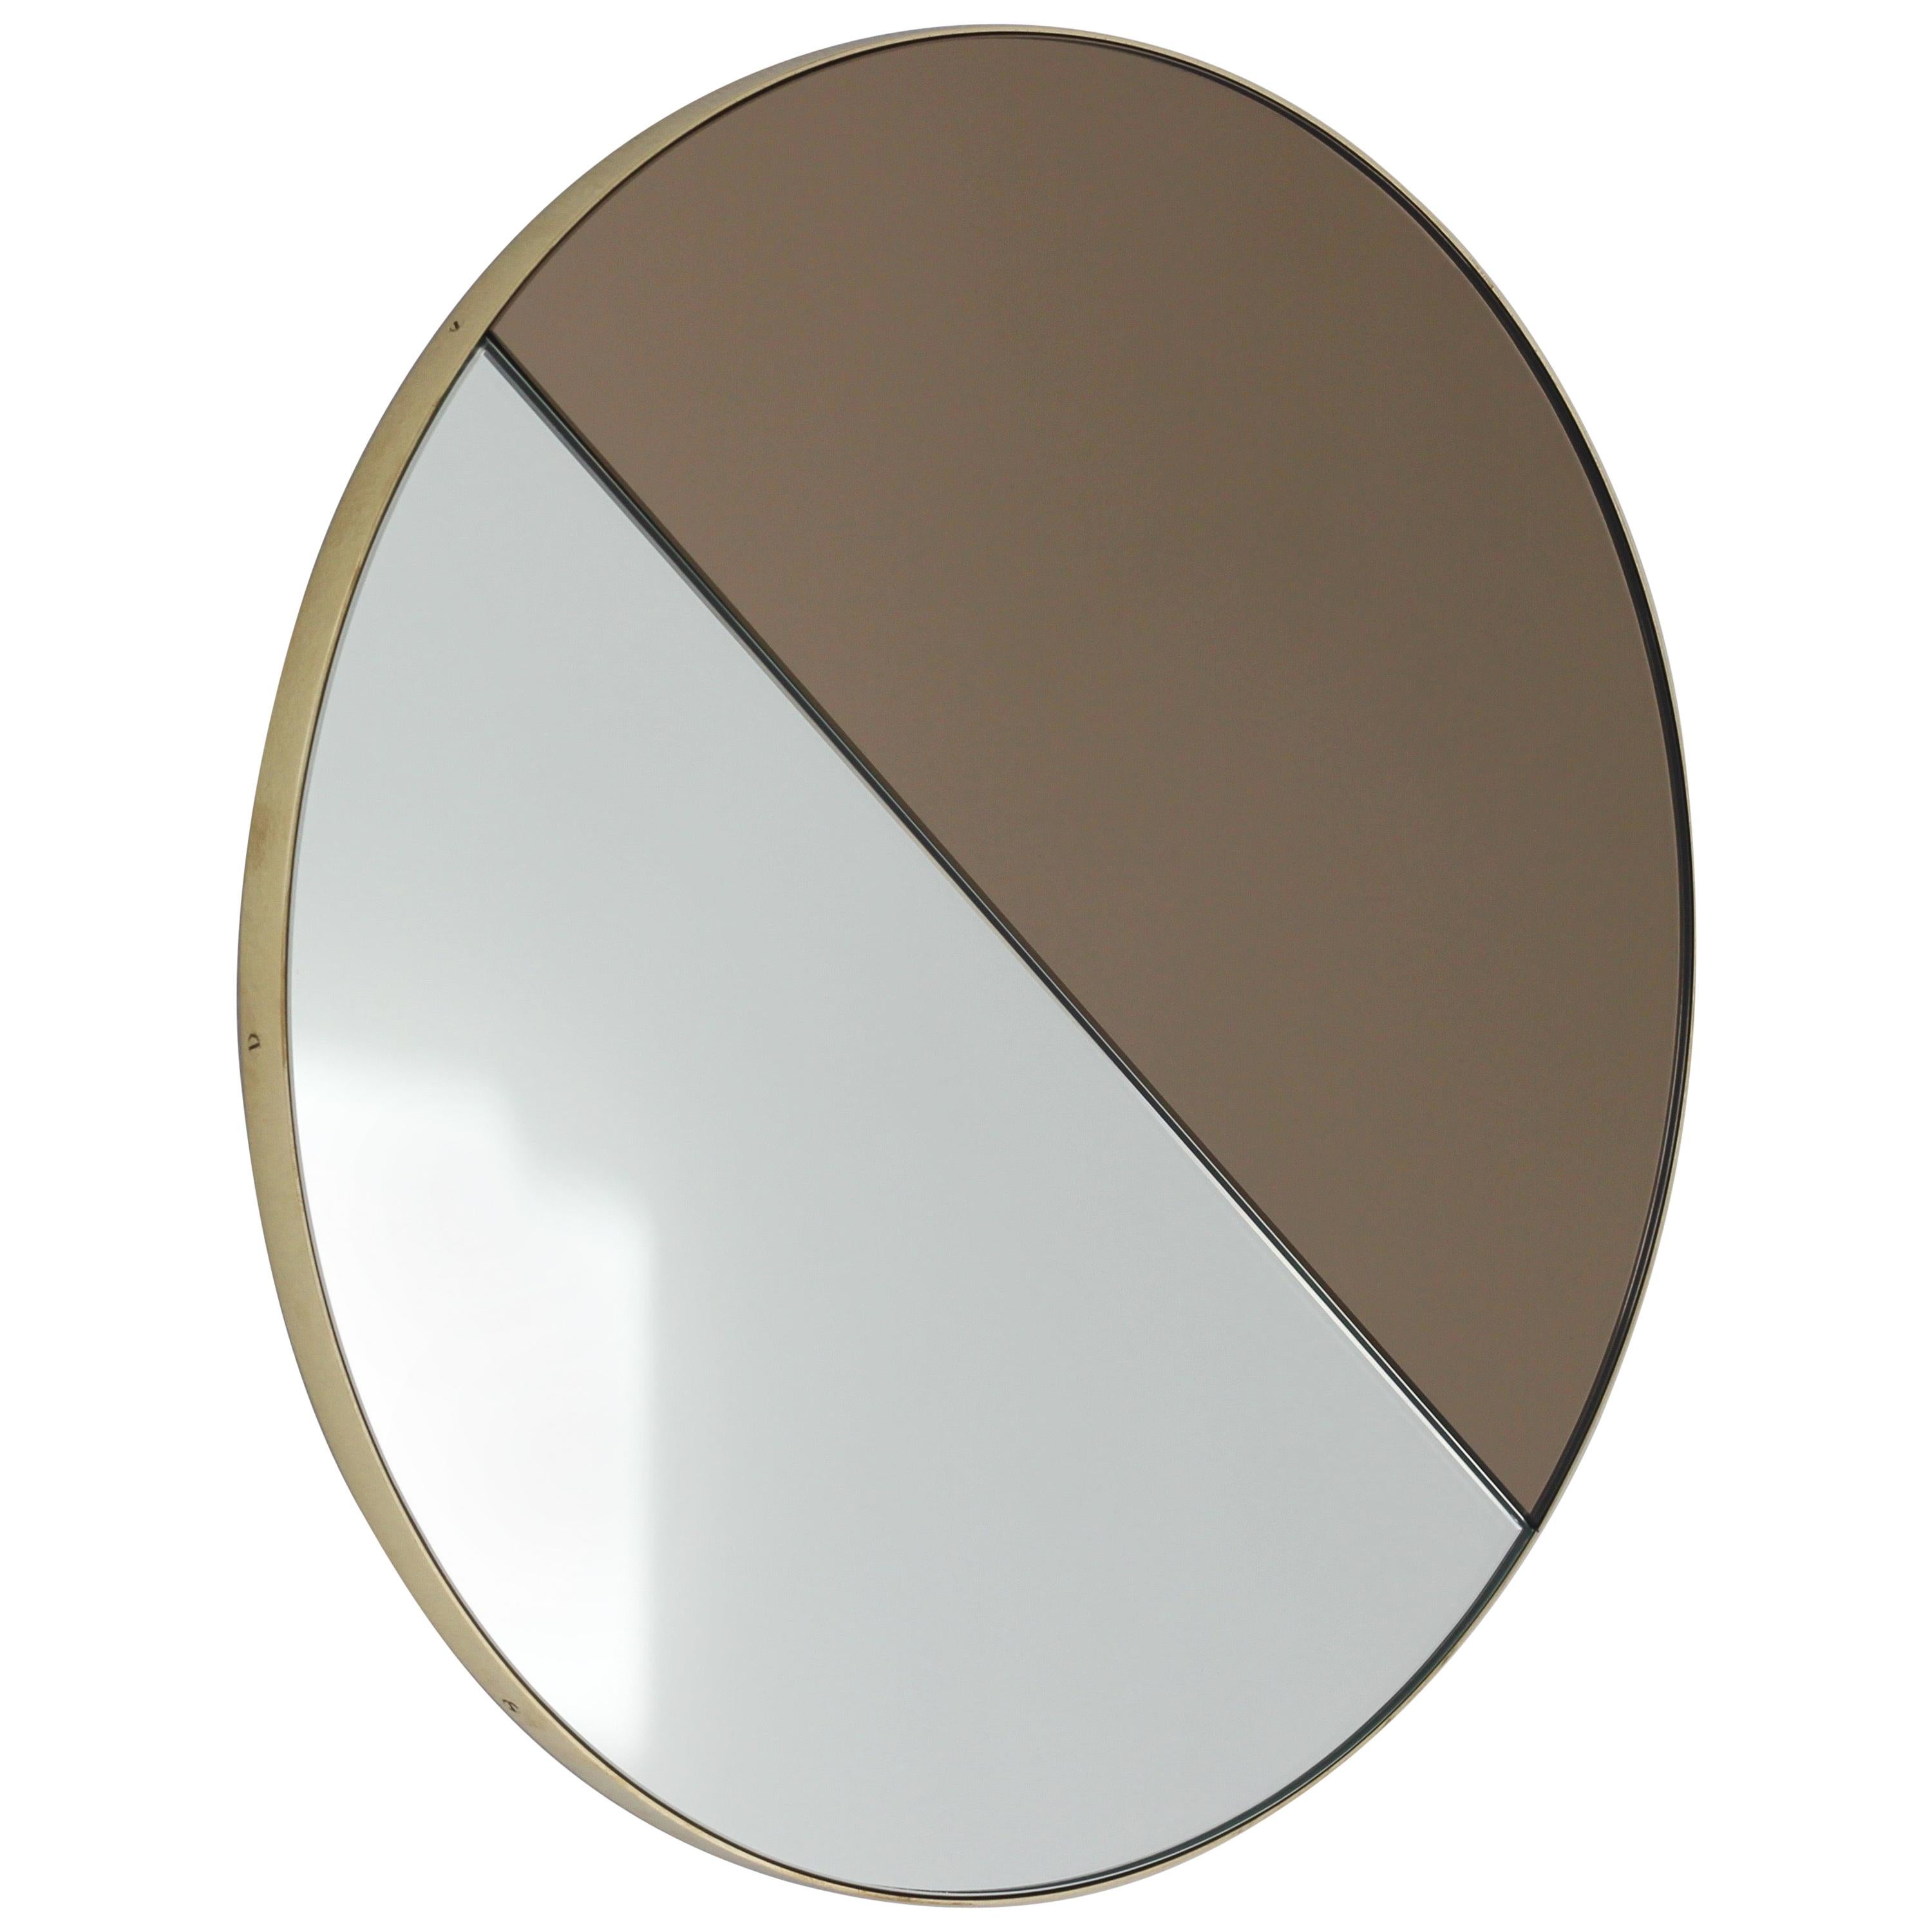 Orbis Dualis Mixed Tinted Silver Bronze Round Mirror with Brass Frame, Small For Sale